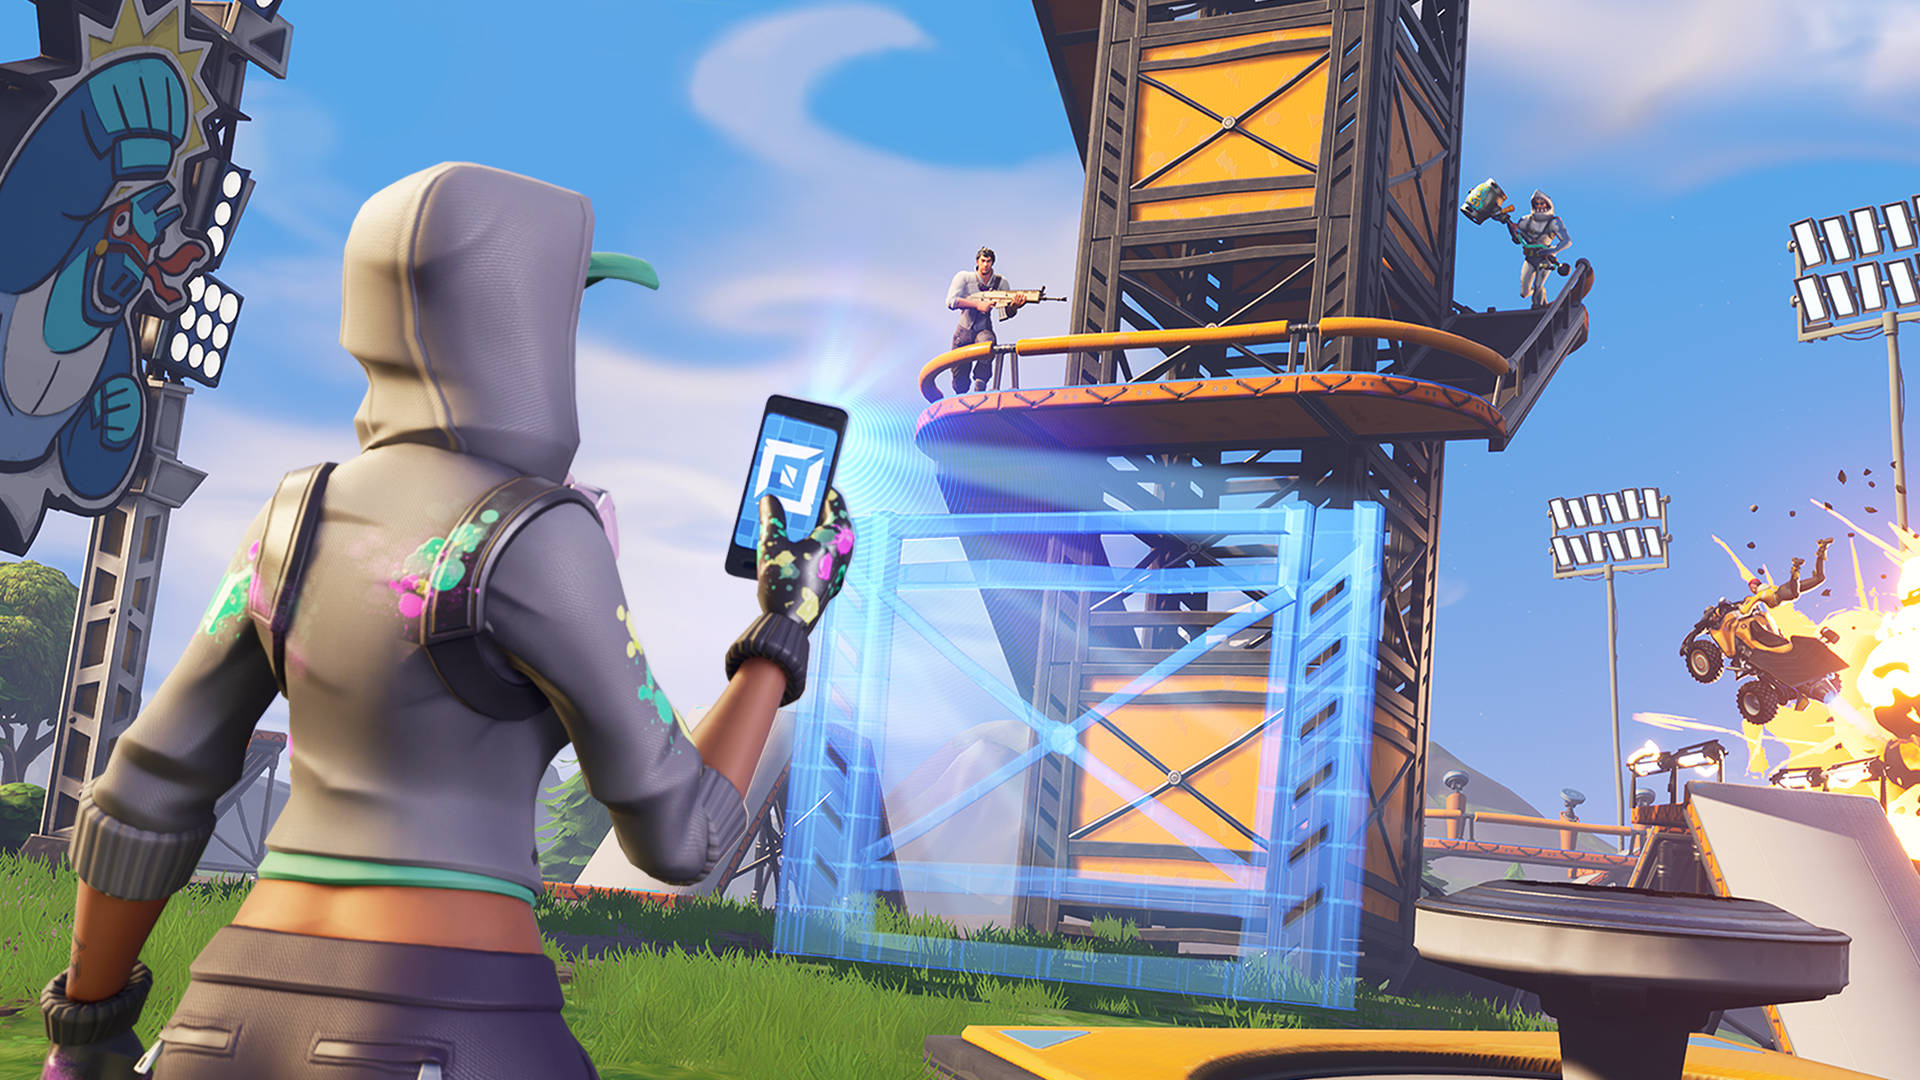 Conquer The Battle Bus In "fortnite" Wallpaper